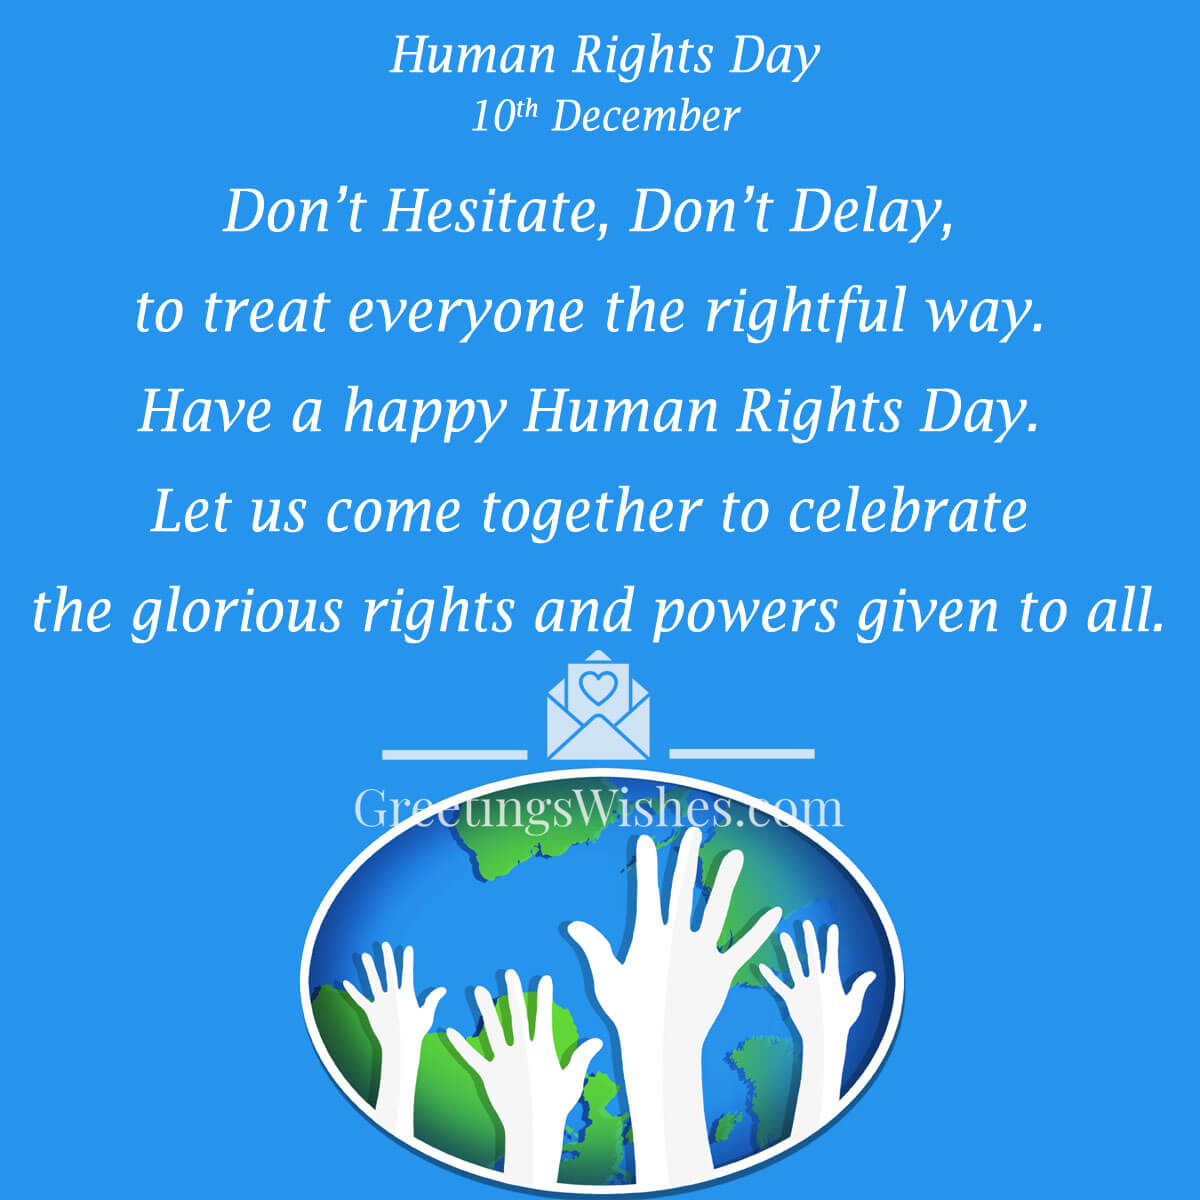 Human Rights Day Message